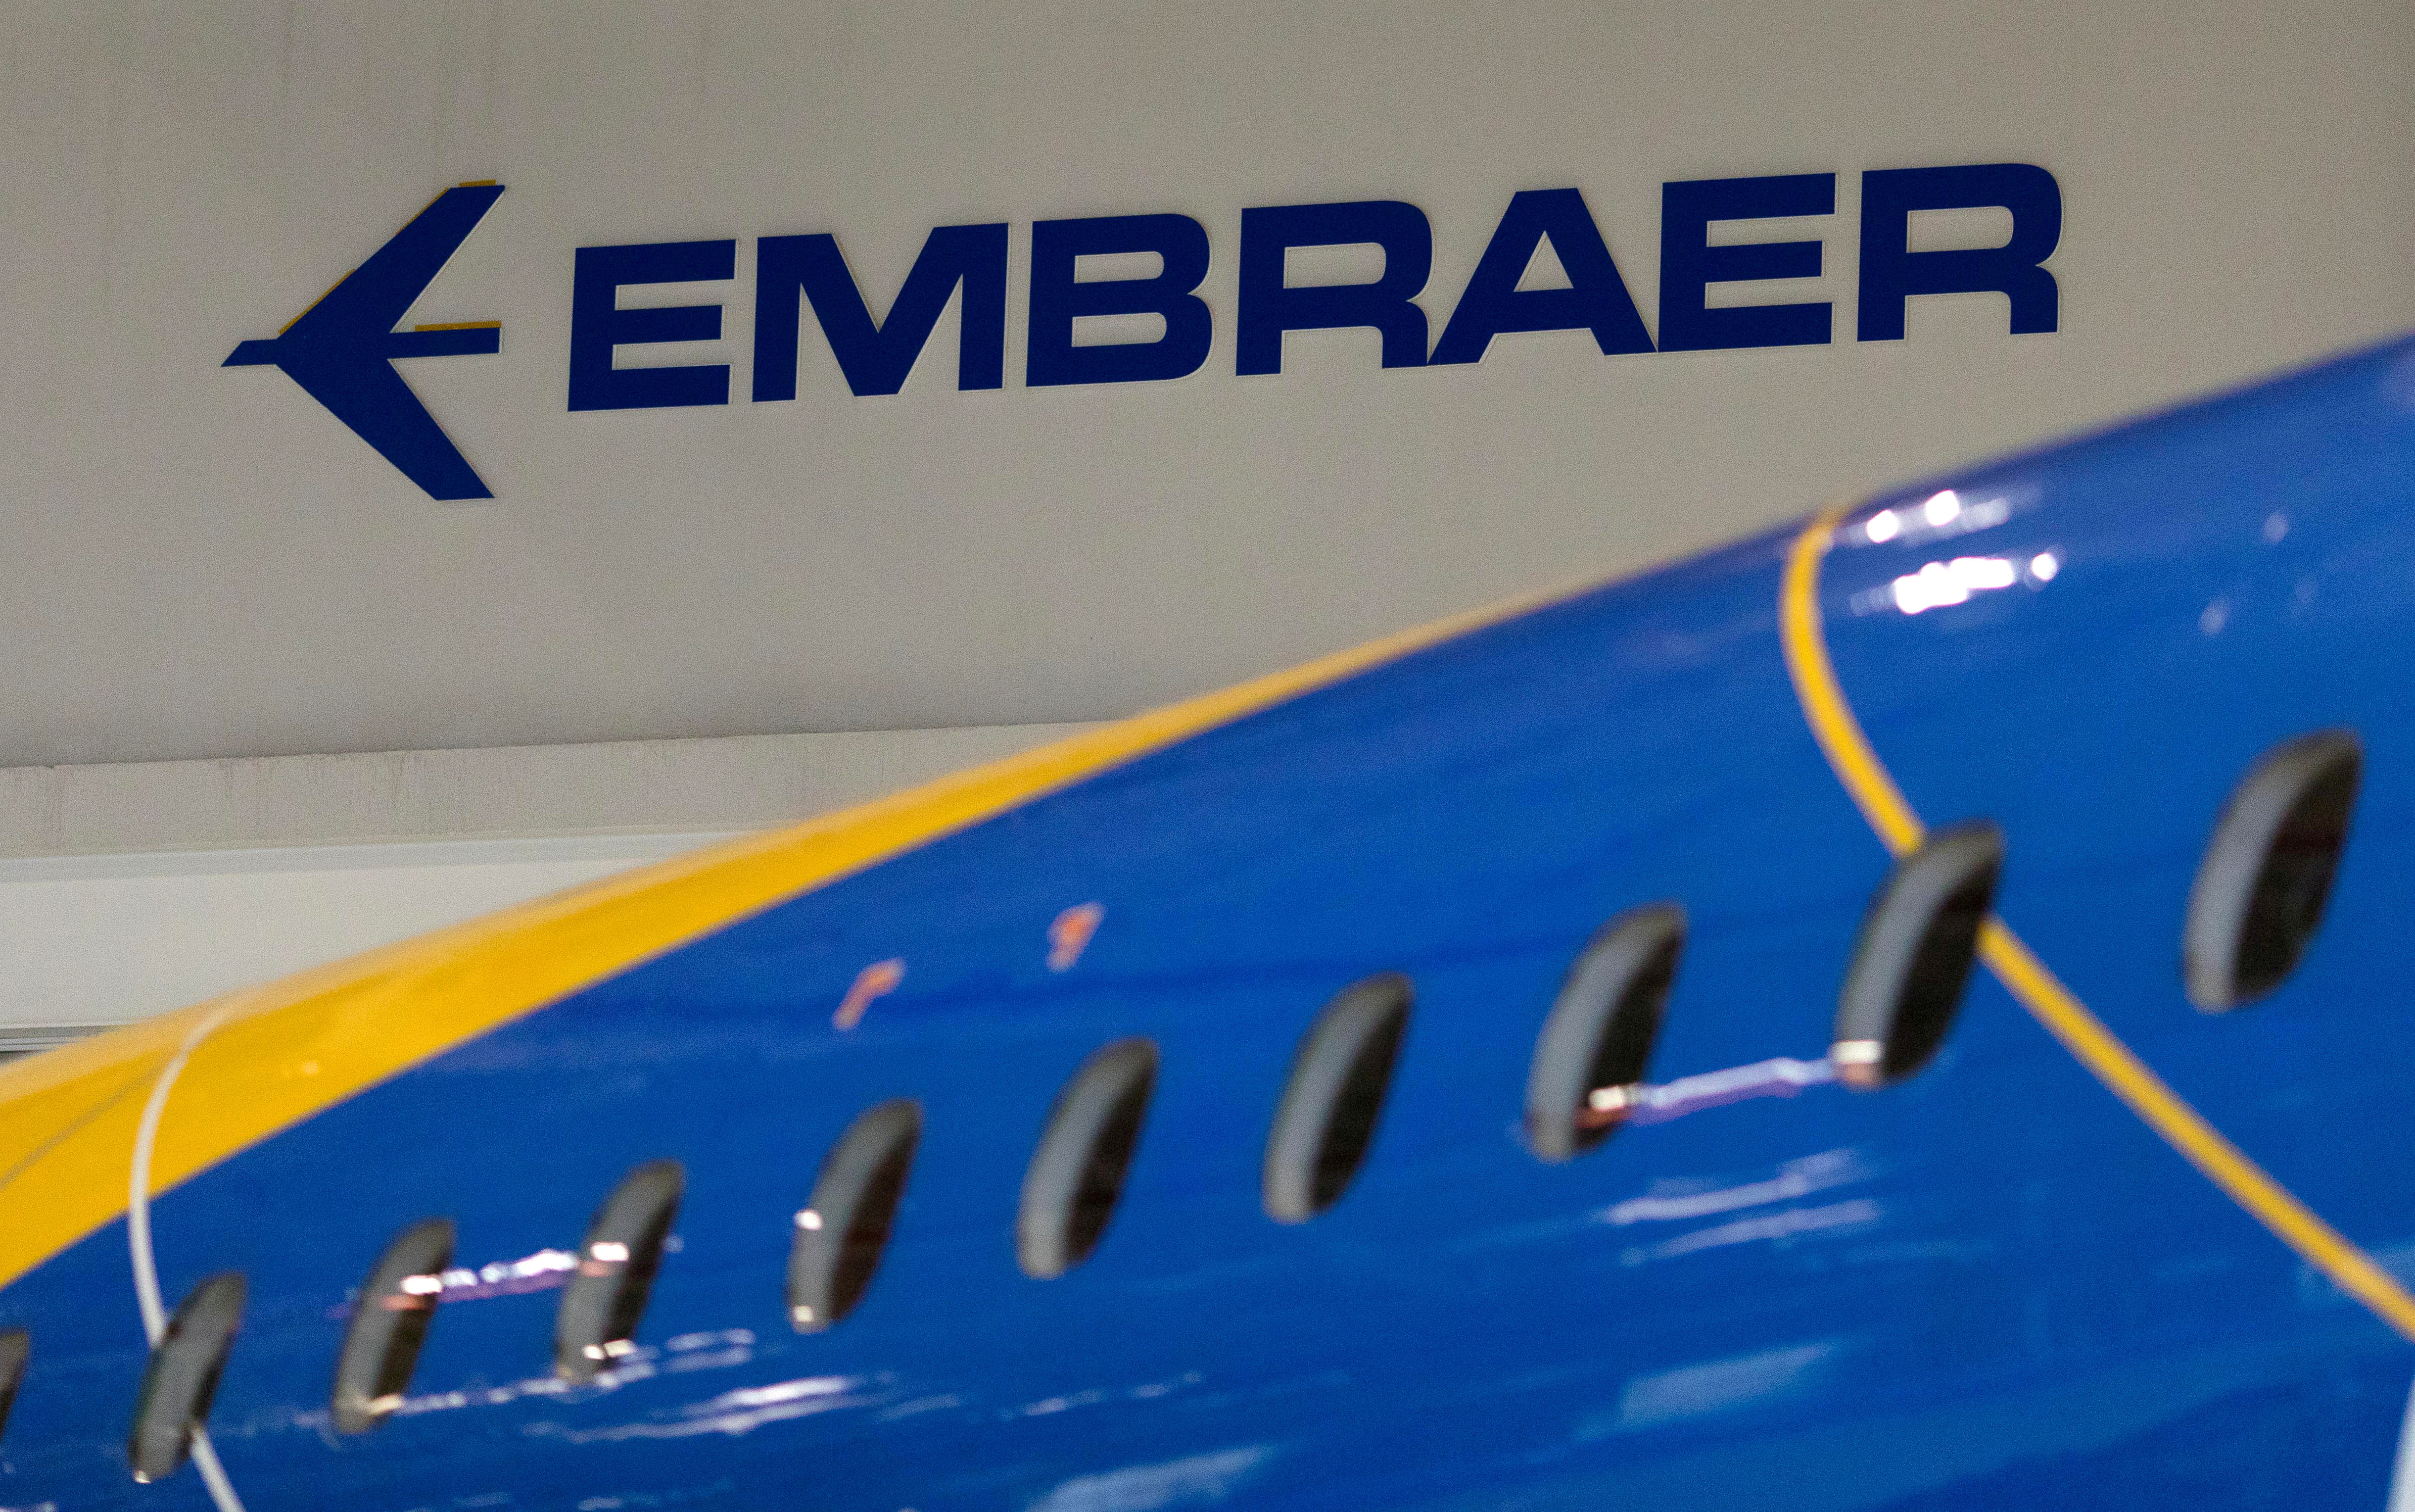 FILE PHOTO: FILE PHOTO: The logo of Brazilian planemaker Embraer SA is seen at the company's headquarters in Sao Jose dos Campos